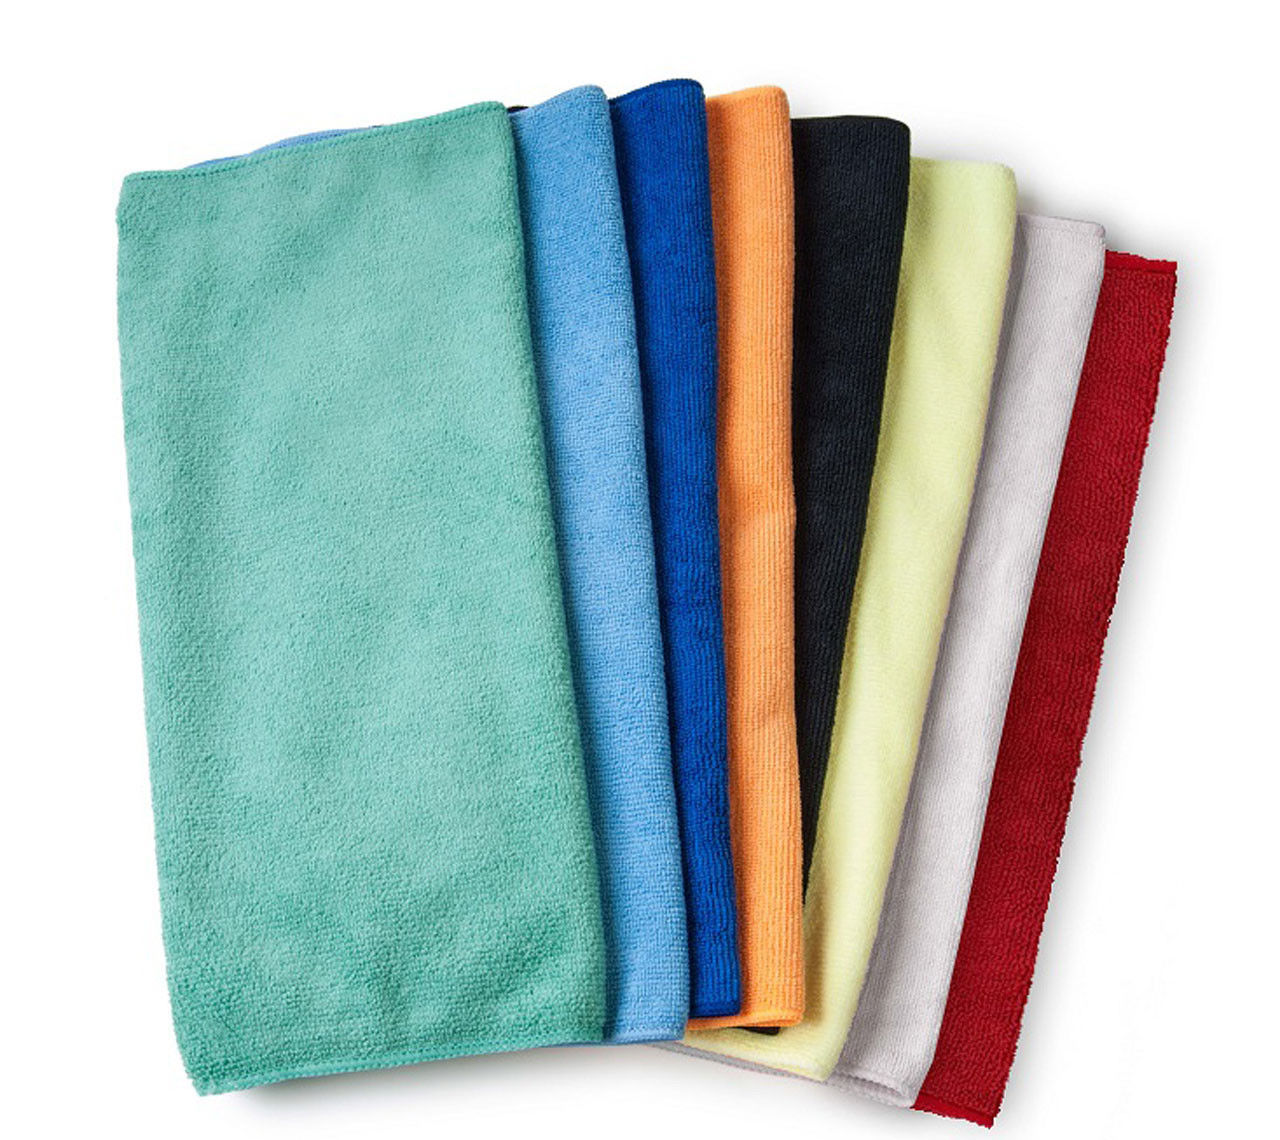 What is the ideal GSM for golf towels bulk, like the Microfiber Golf Towel, 300 gsm, 16x16?